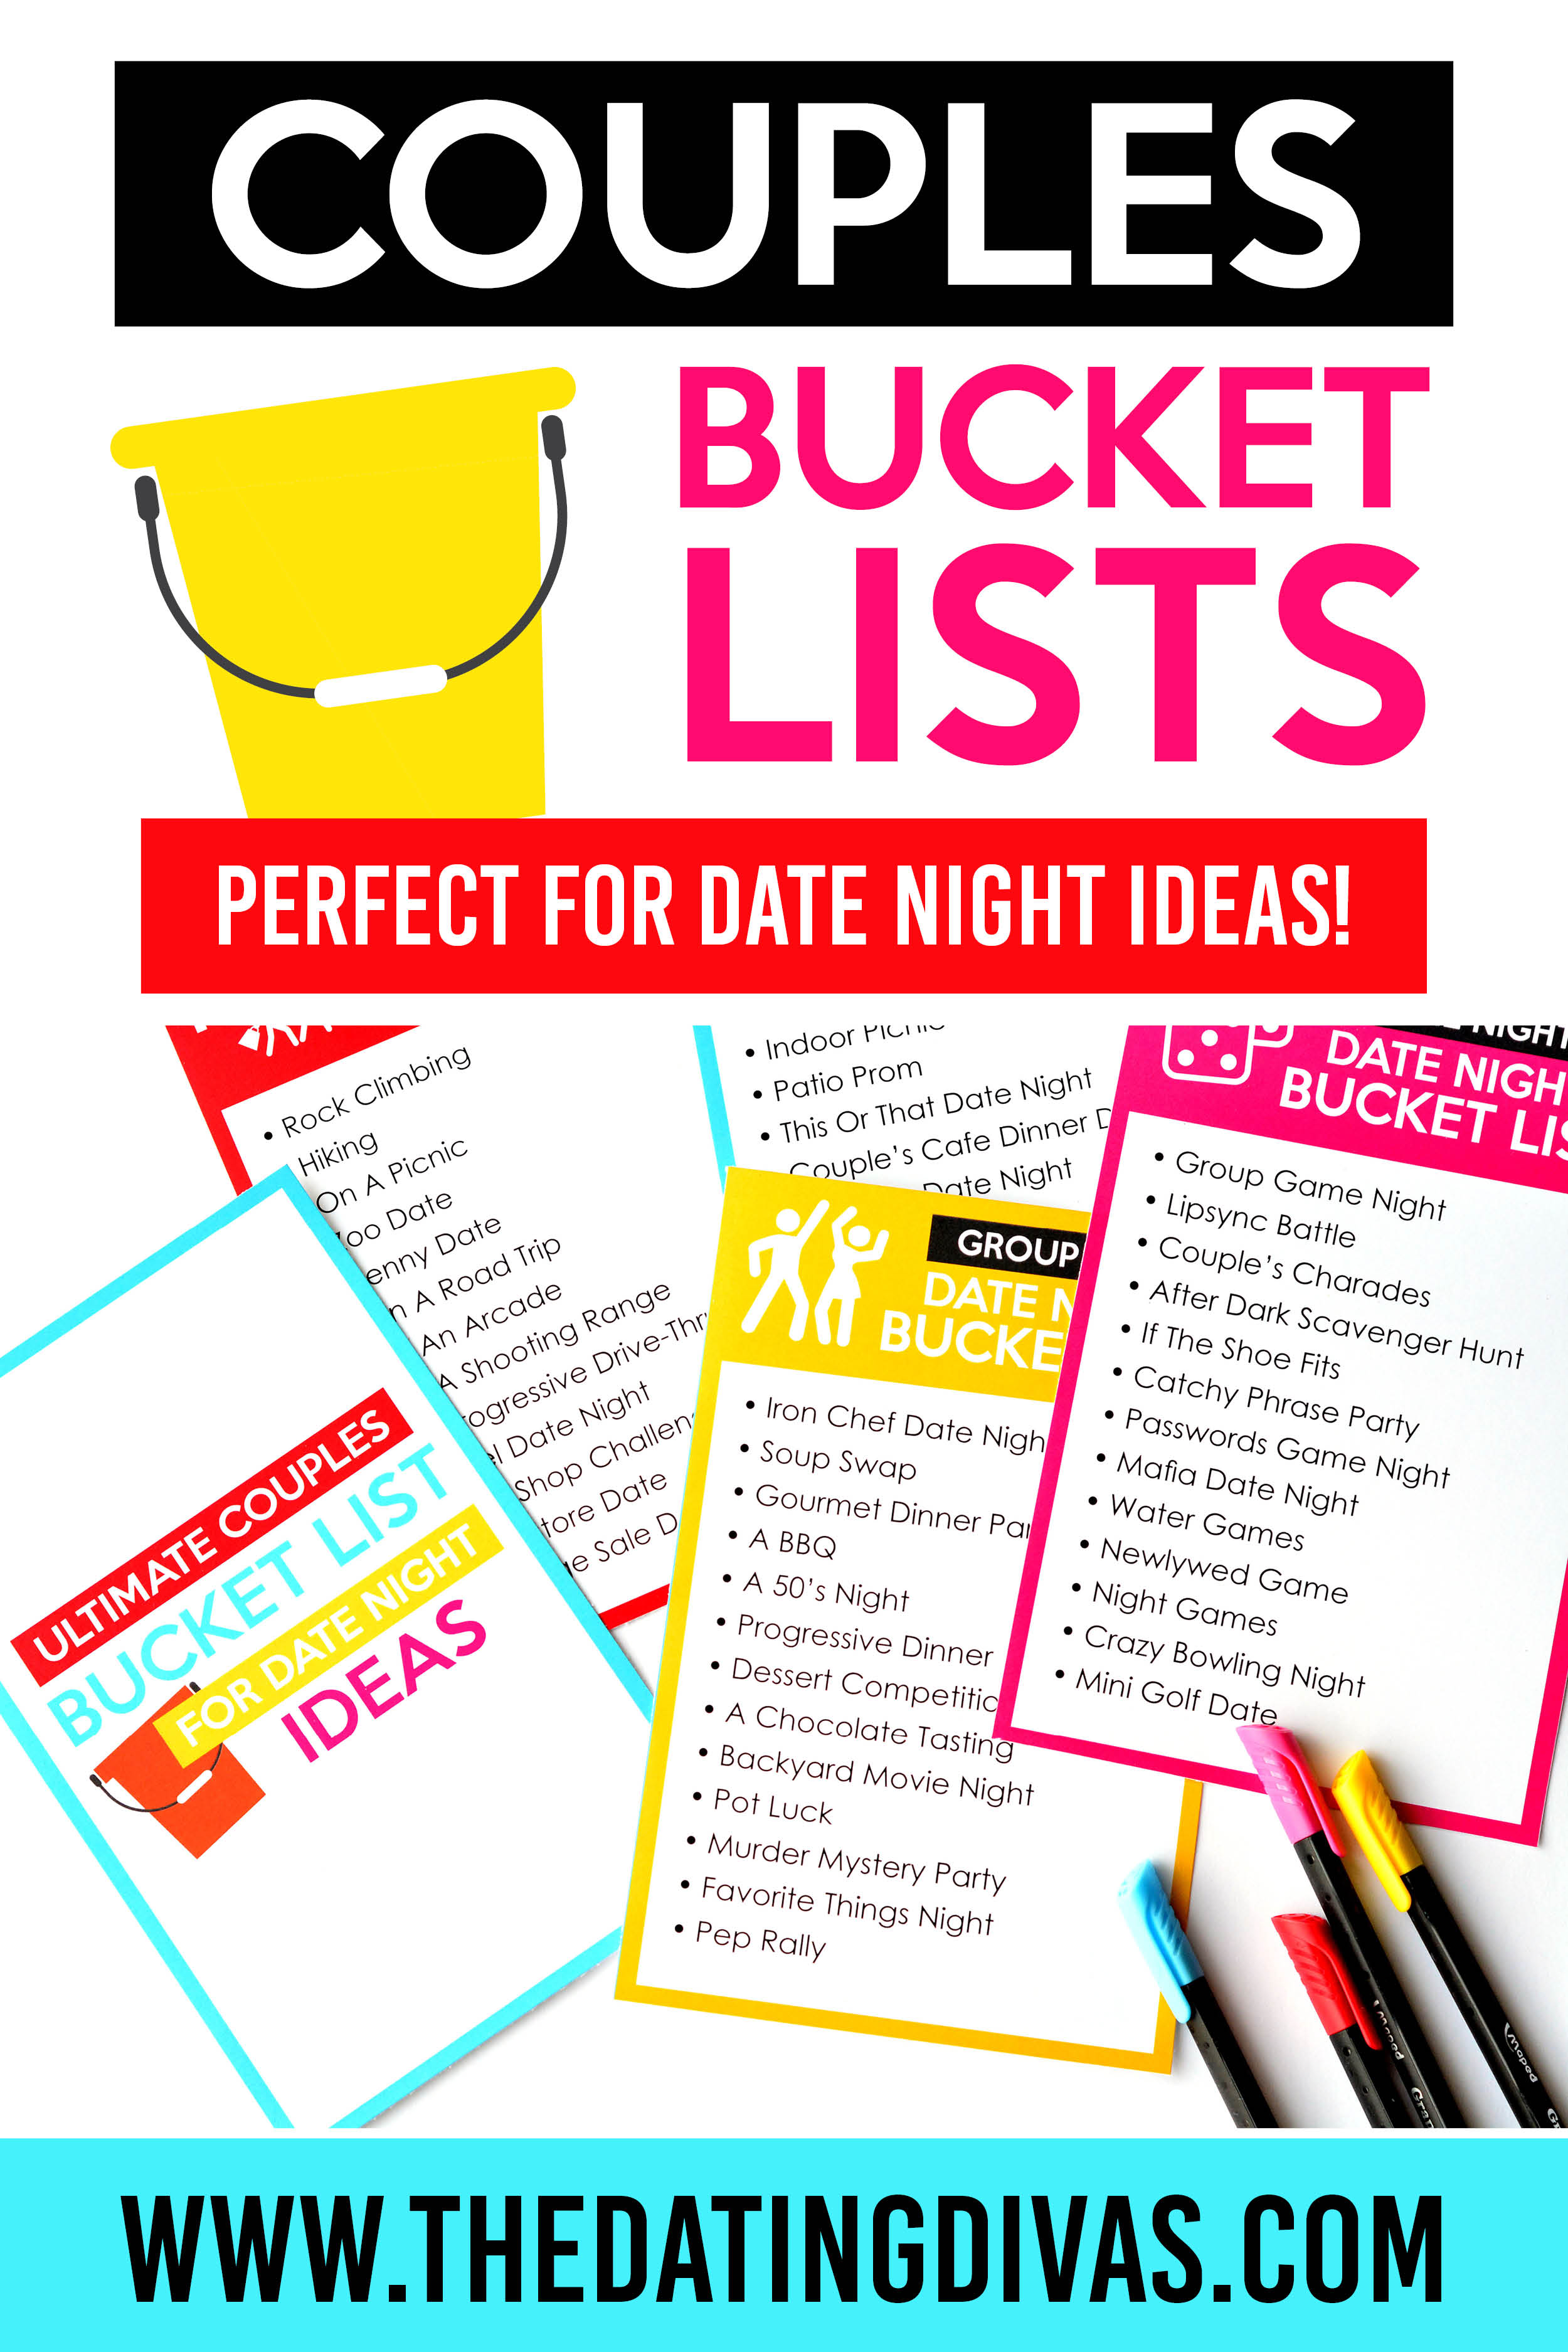 Couples Bucket List Date Night Ideas List From The Dating Divas